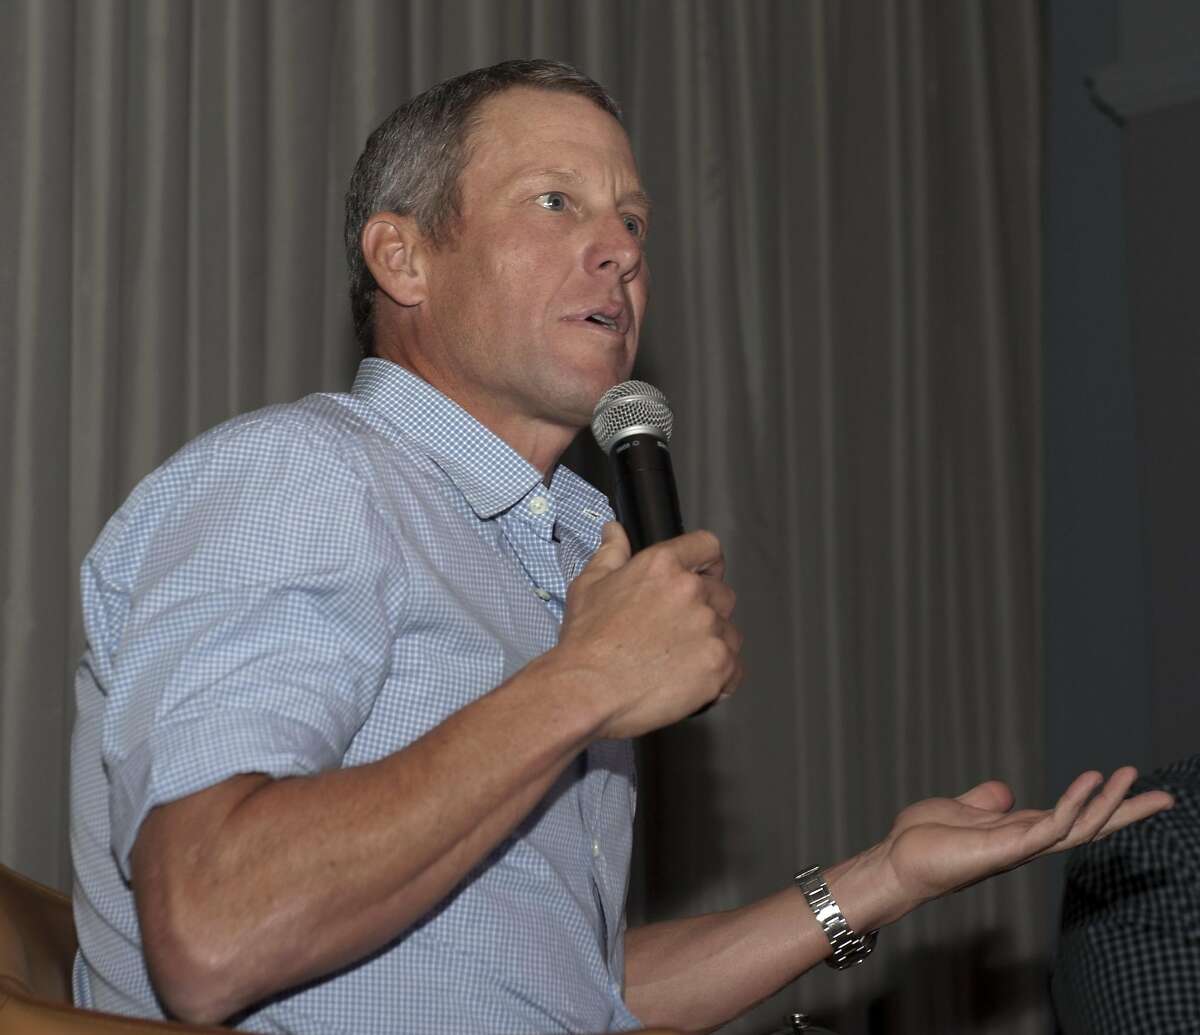 Lance Armstrong speaks to the crowd during an interview conducted at The Batttery, a private club in San Francisco, on March 11, 2016.